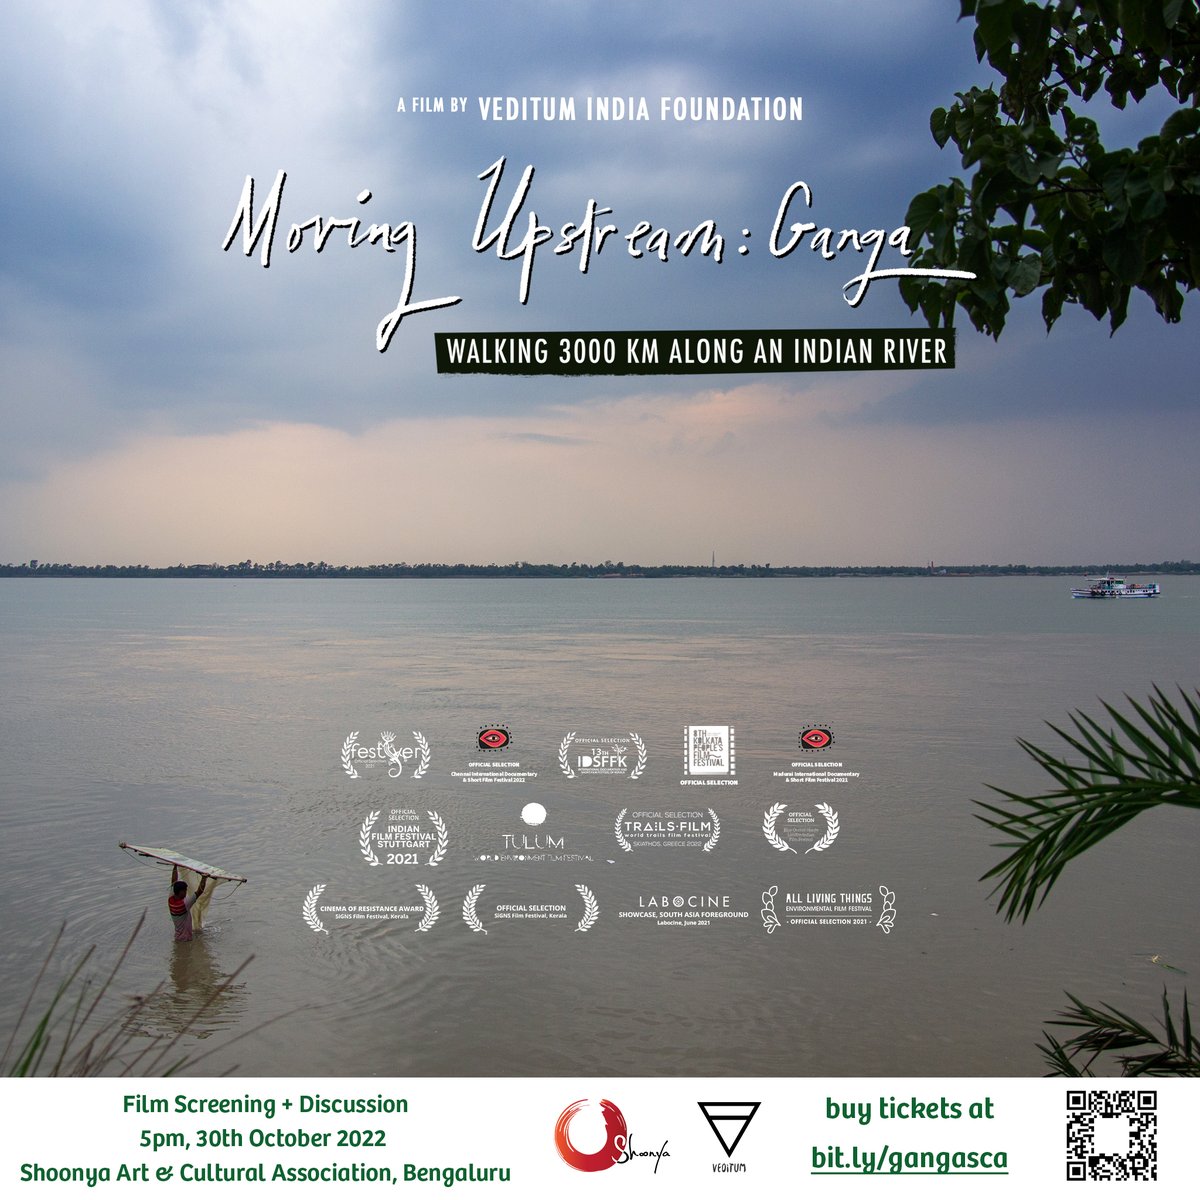 #Bengaluru screening of my documentary 'Moving Upstream: Ganga', filmed on my 3000km walk along the river, is happening at 5pm on 30th October, @ Shoonya Space (Lalbagh Road) Come if you can? I'll be there too! Buy tickets here: bit.ly/gangasca #MovingUpstream #Ganga